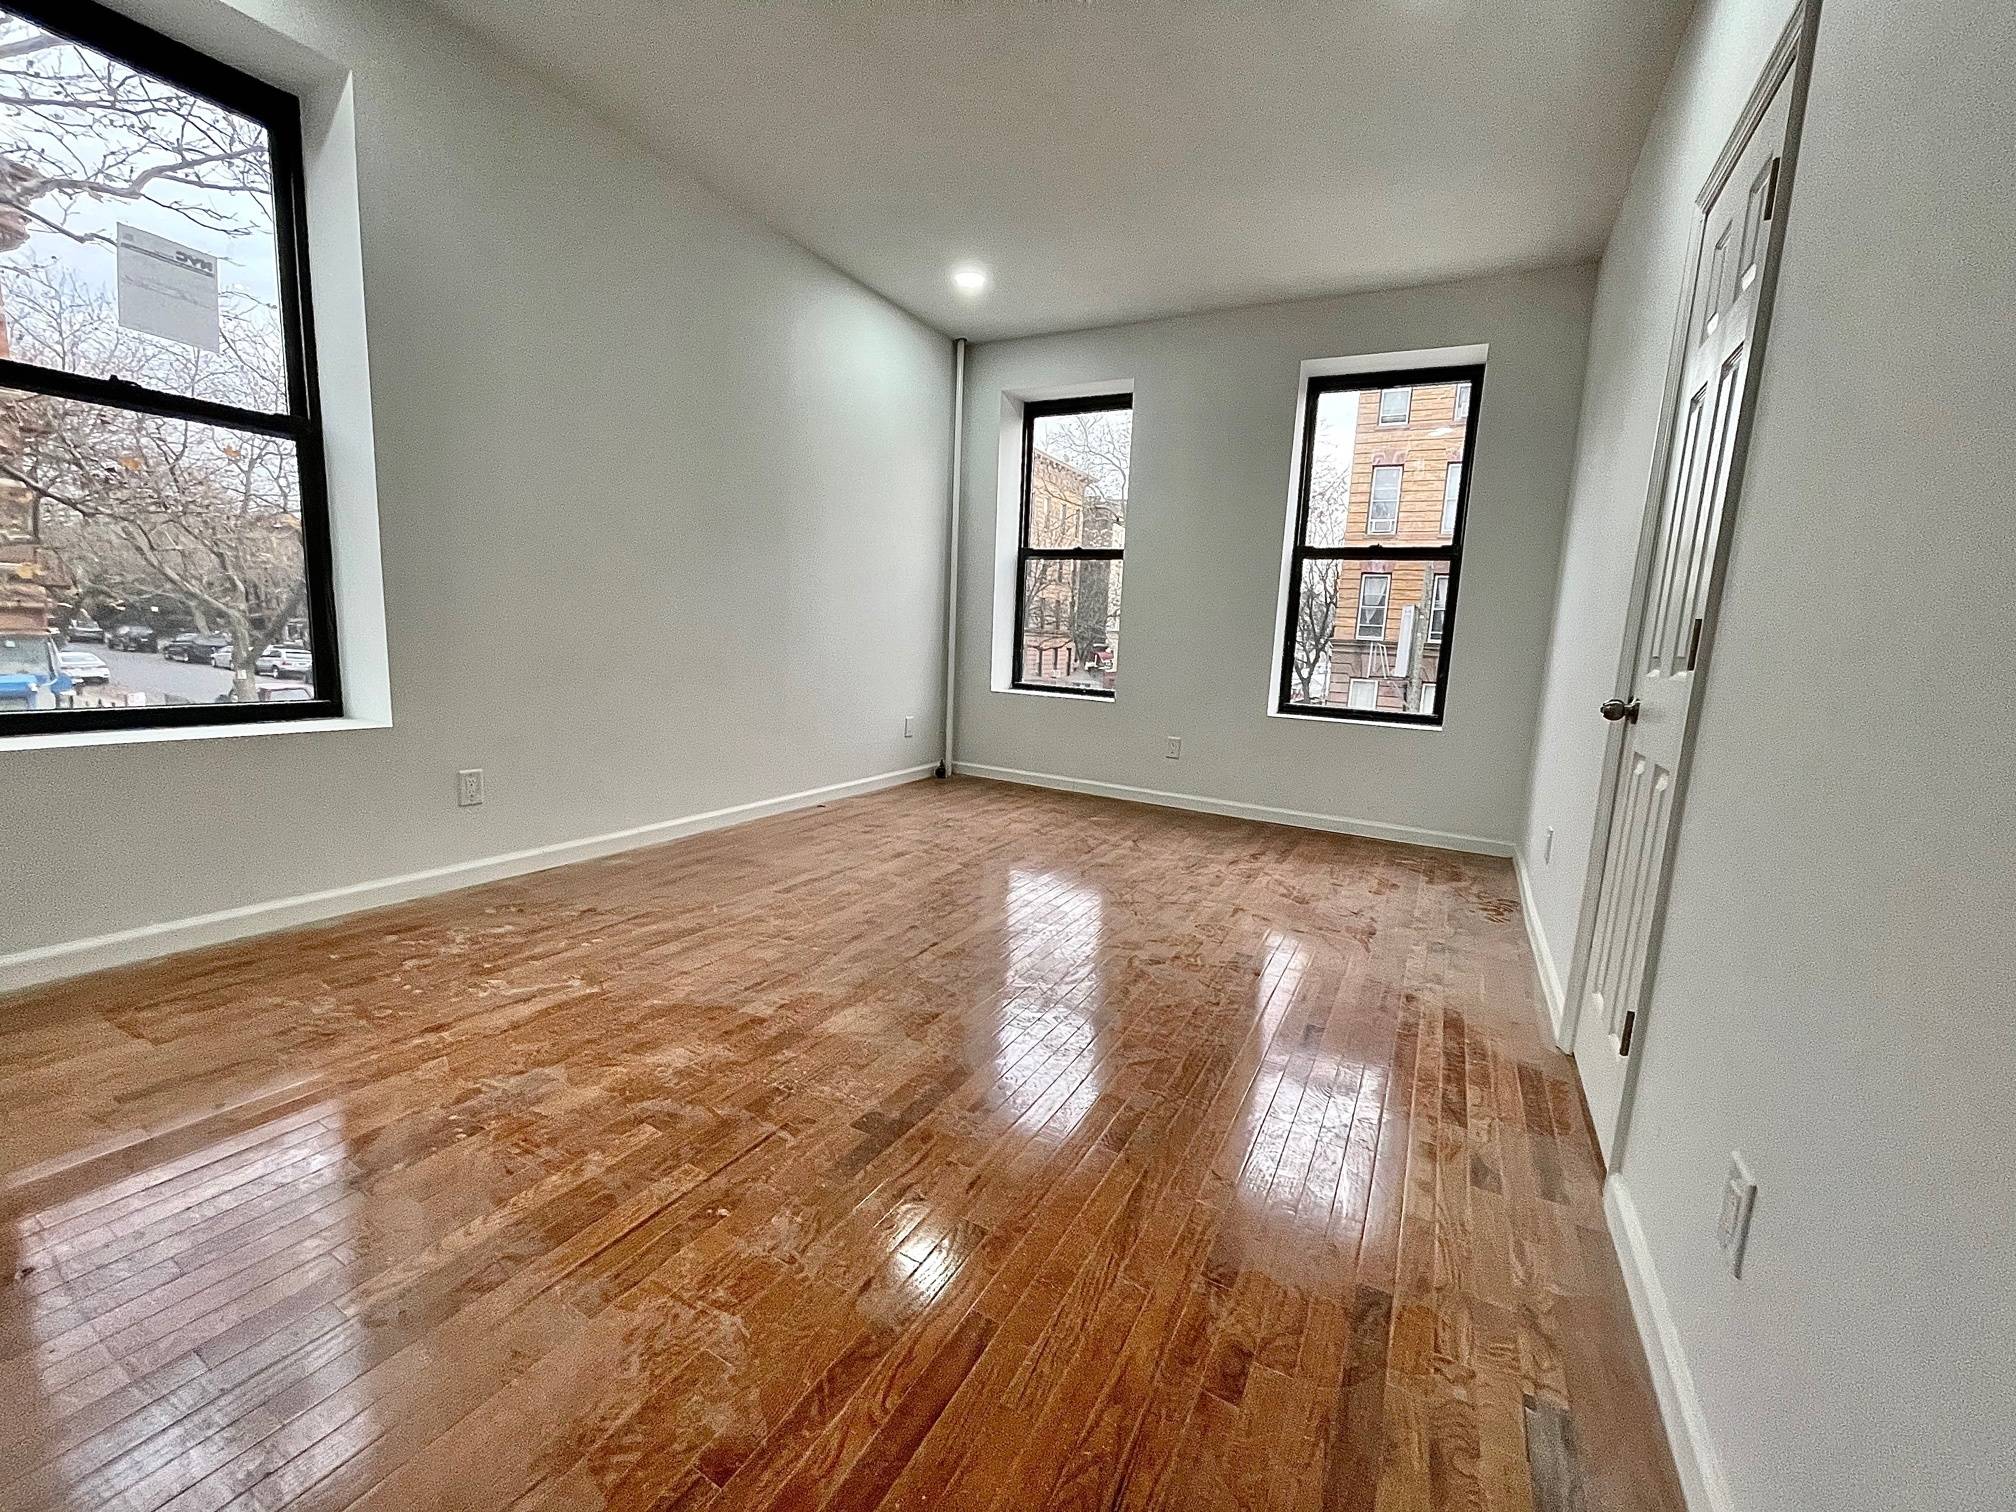 Full 2nd floor apt with brand new renovations.